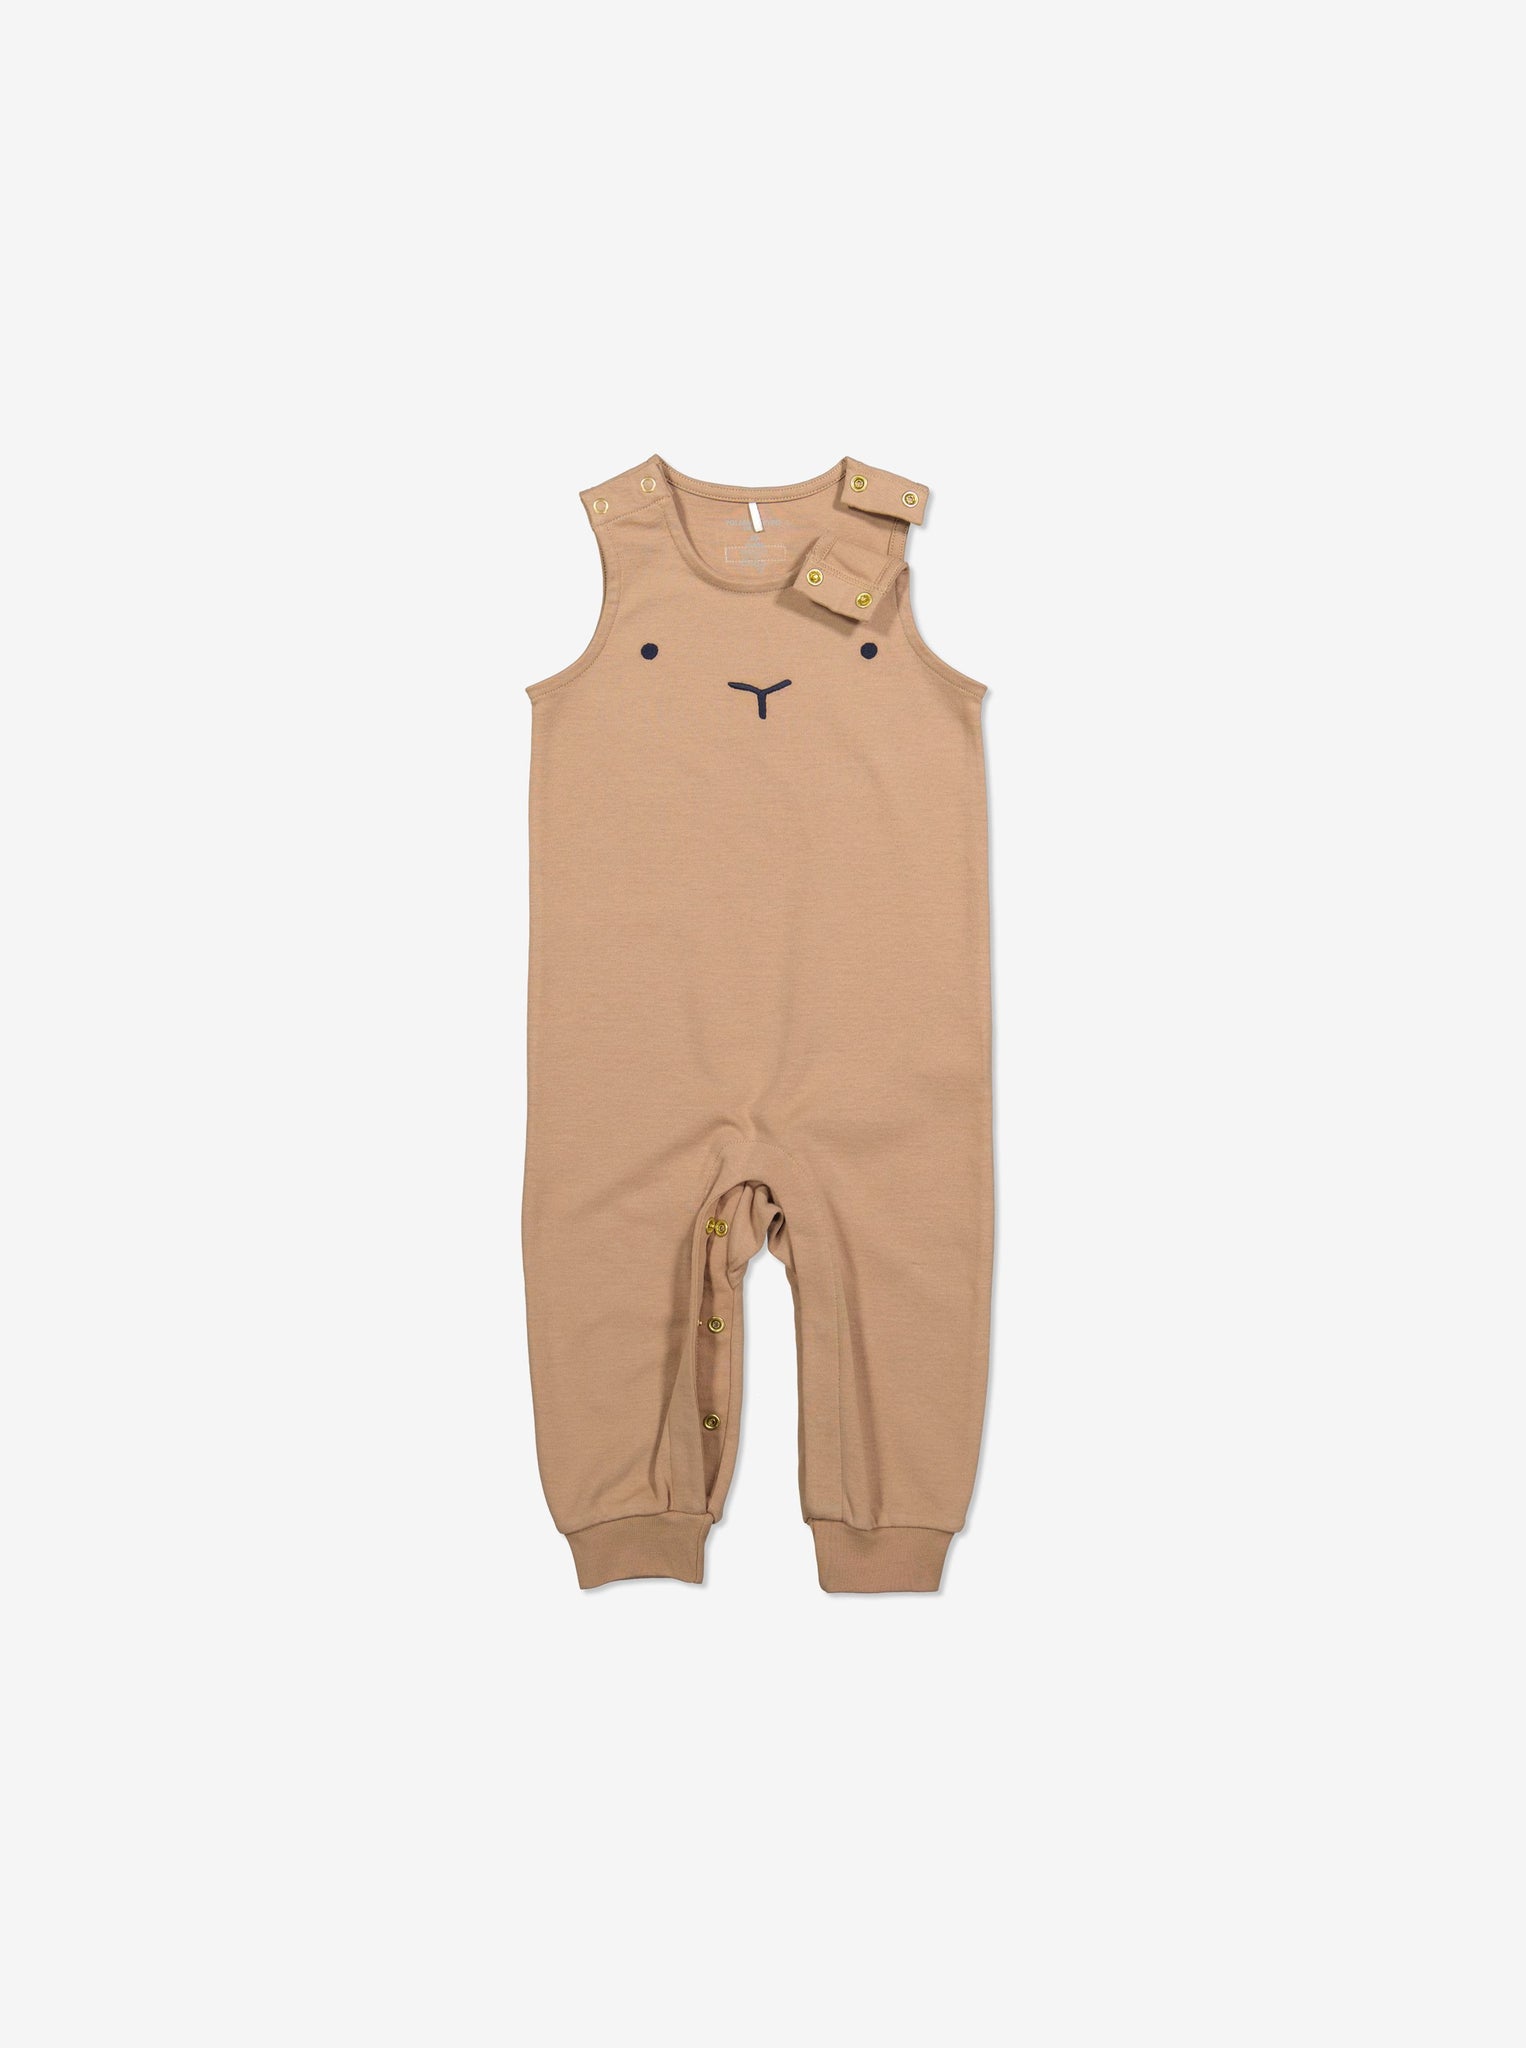  Organic Brown Baby Dungarees from Polarn O. Pyret Kidswear. Made with 100% organic cotton.